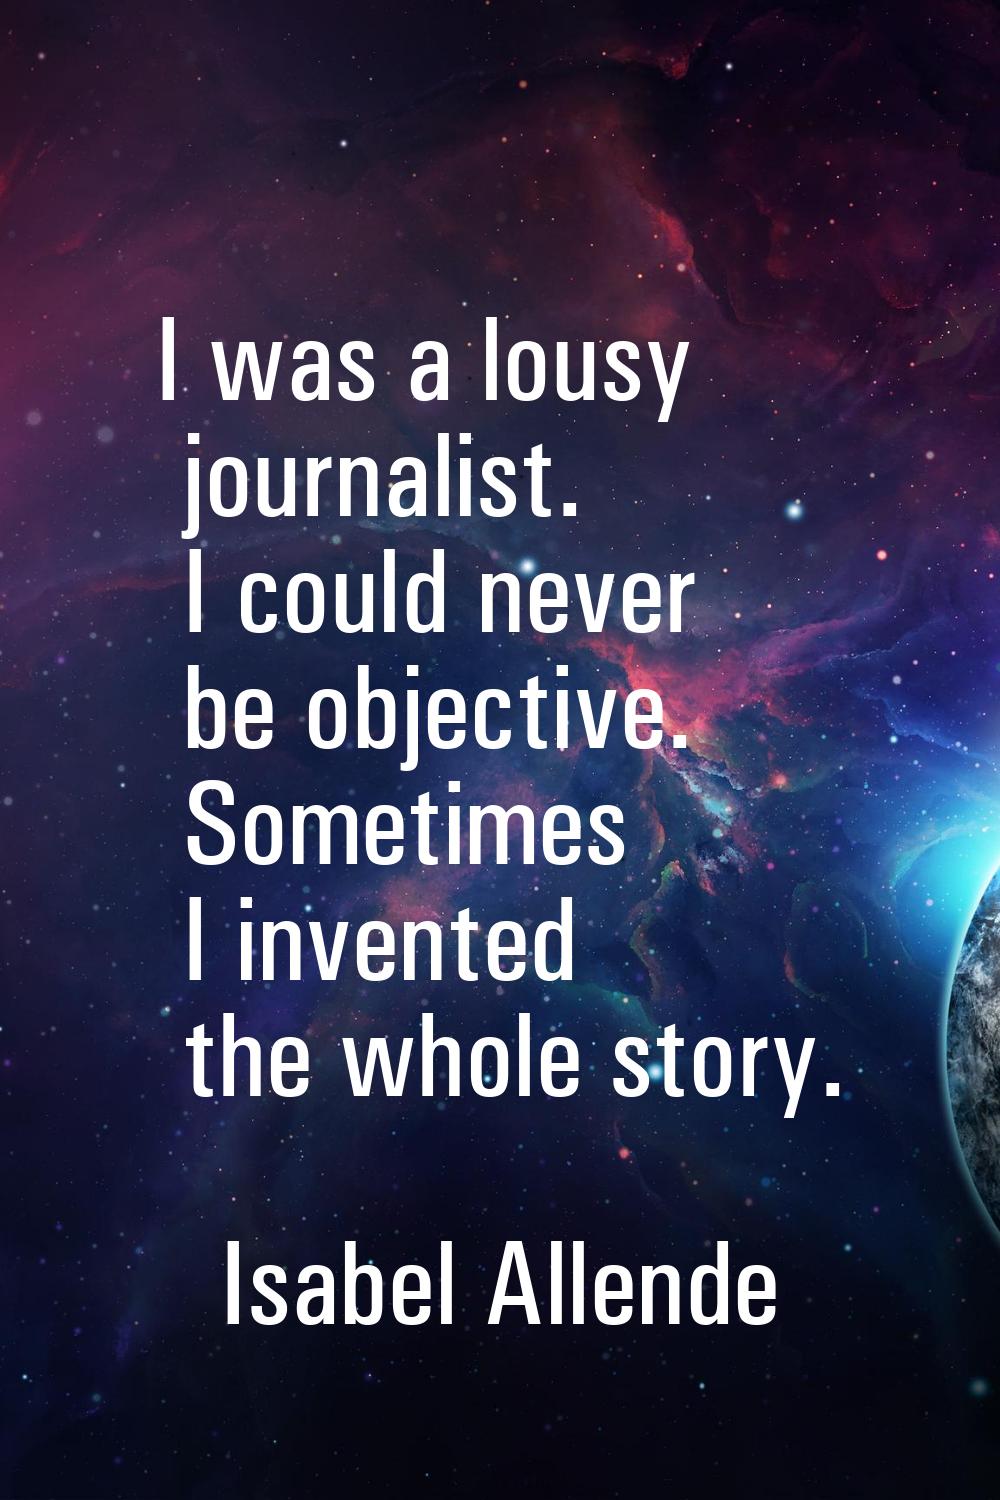 I was a lousy journalist. I could never be objective. Sometimes I invented the whole story.